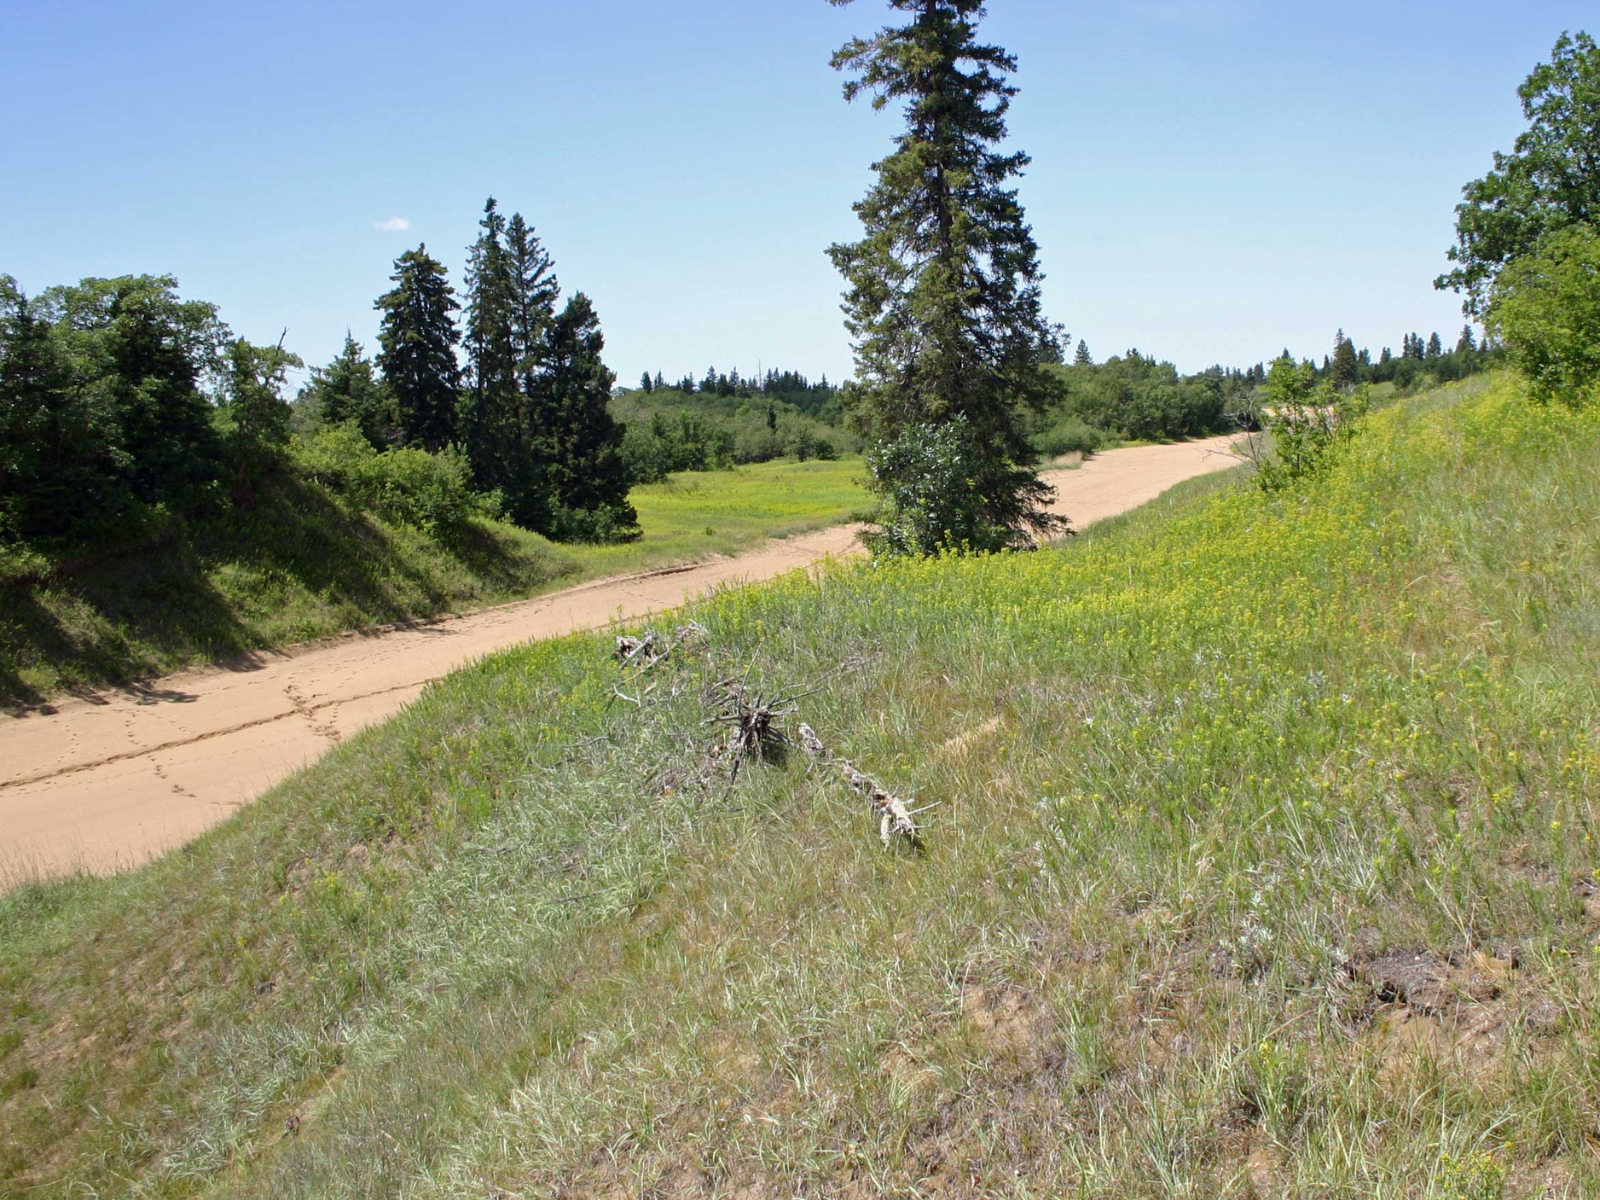 A dry grassy ridge leading down to a sandy strip. Several tall trees grow on the edges.